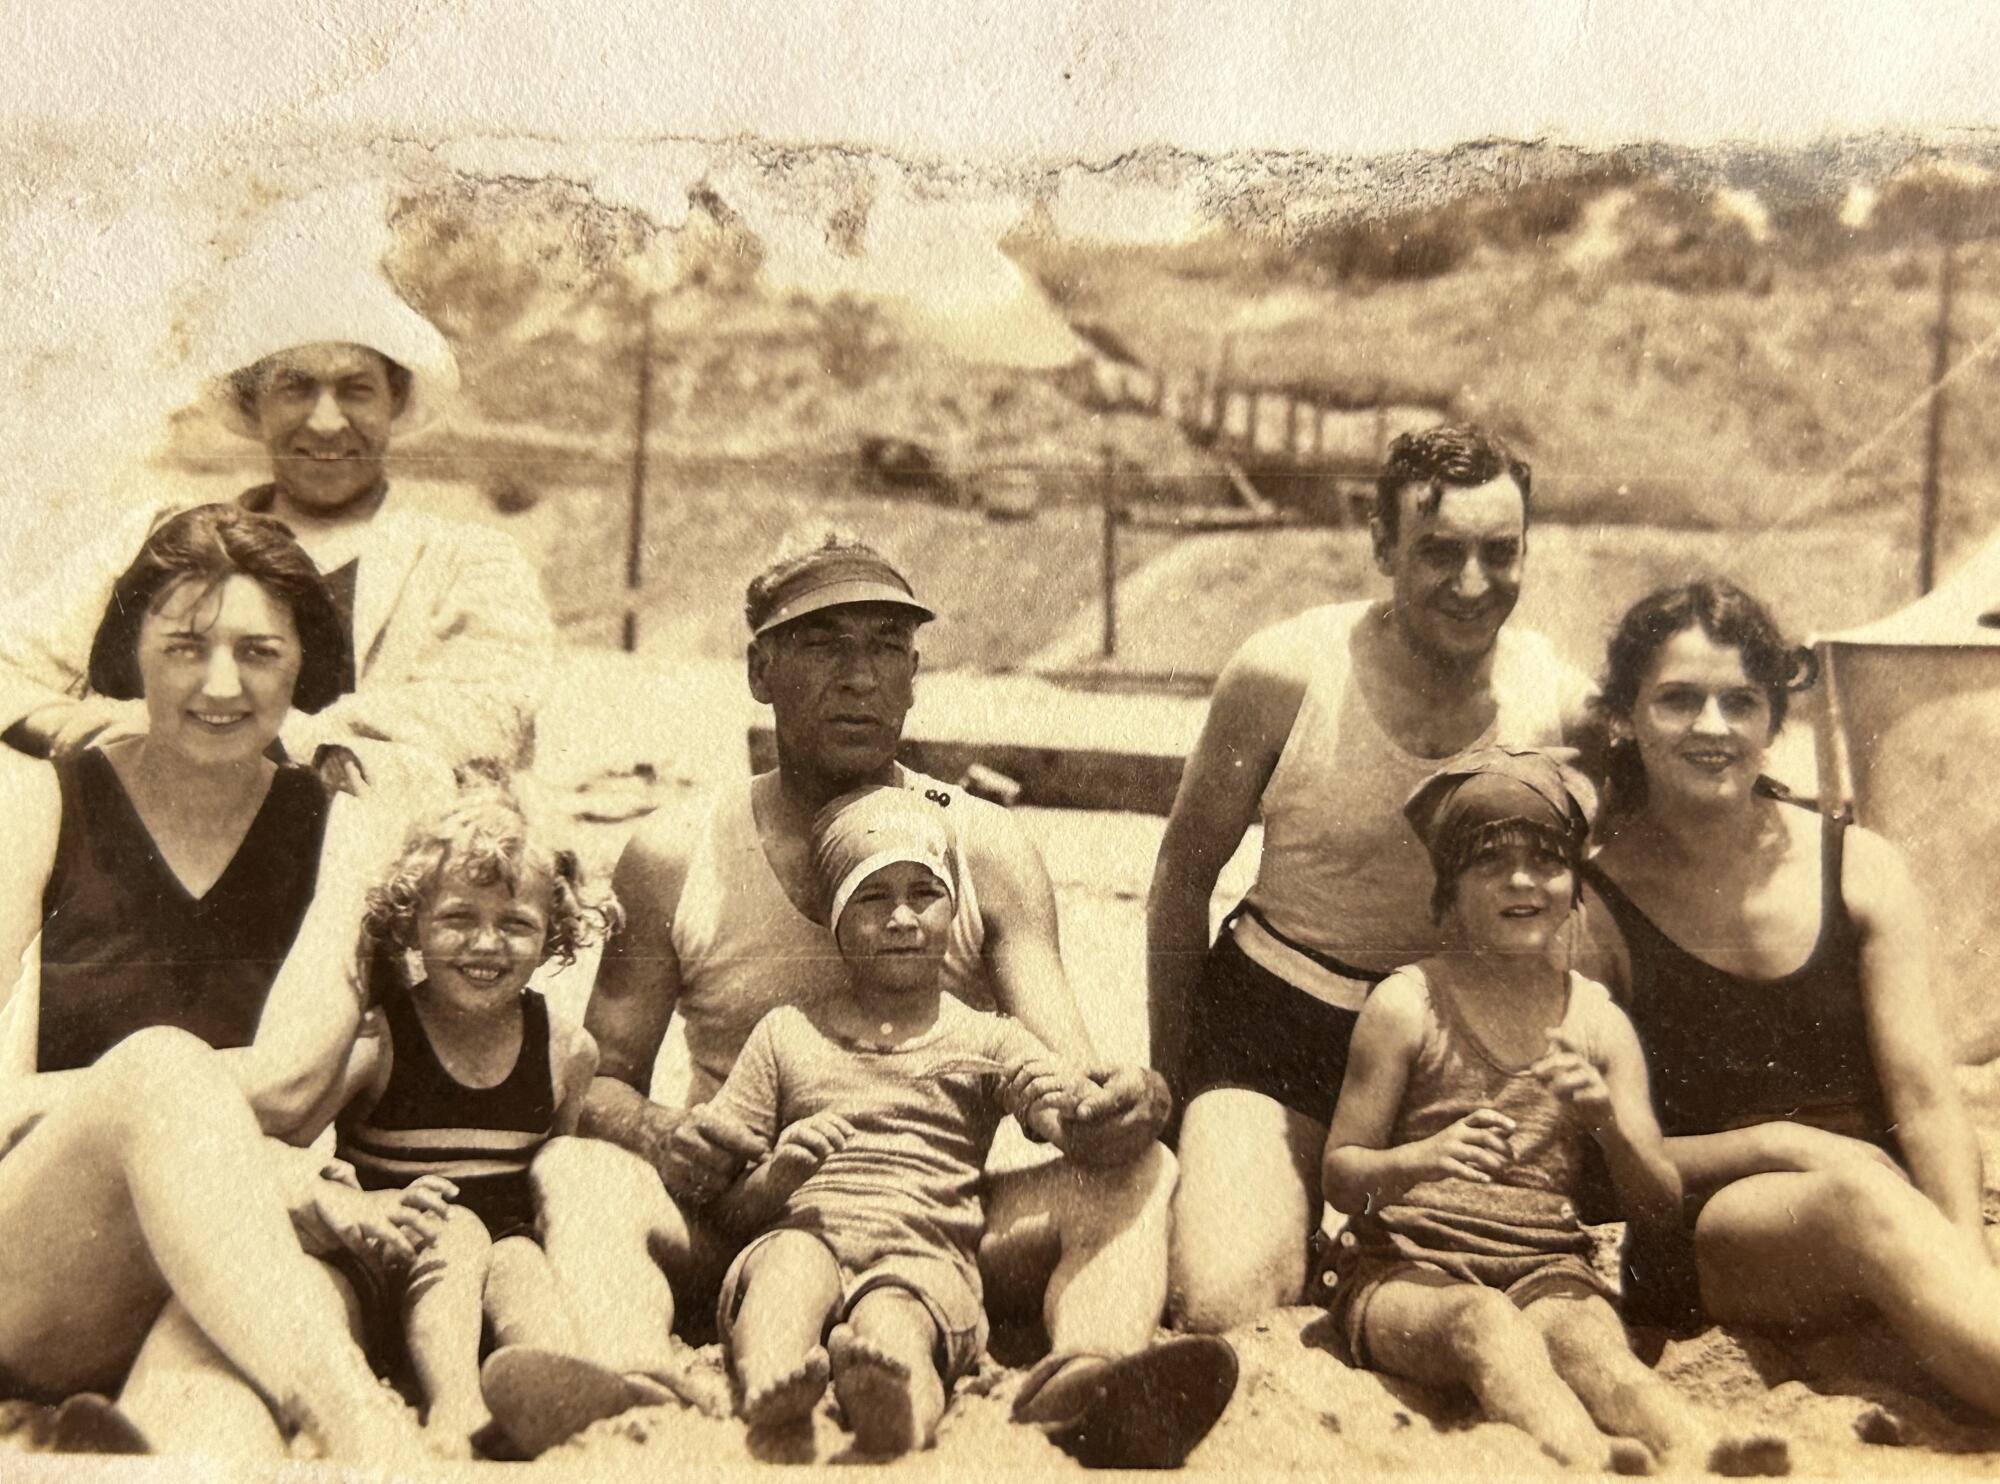 A vintage photo of a family at the beach with five adults and three small children in bathing suits